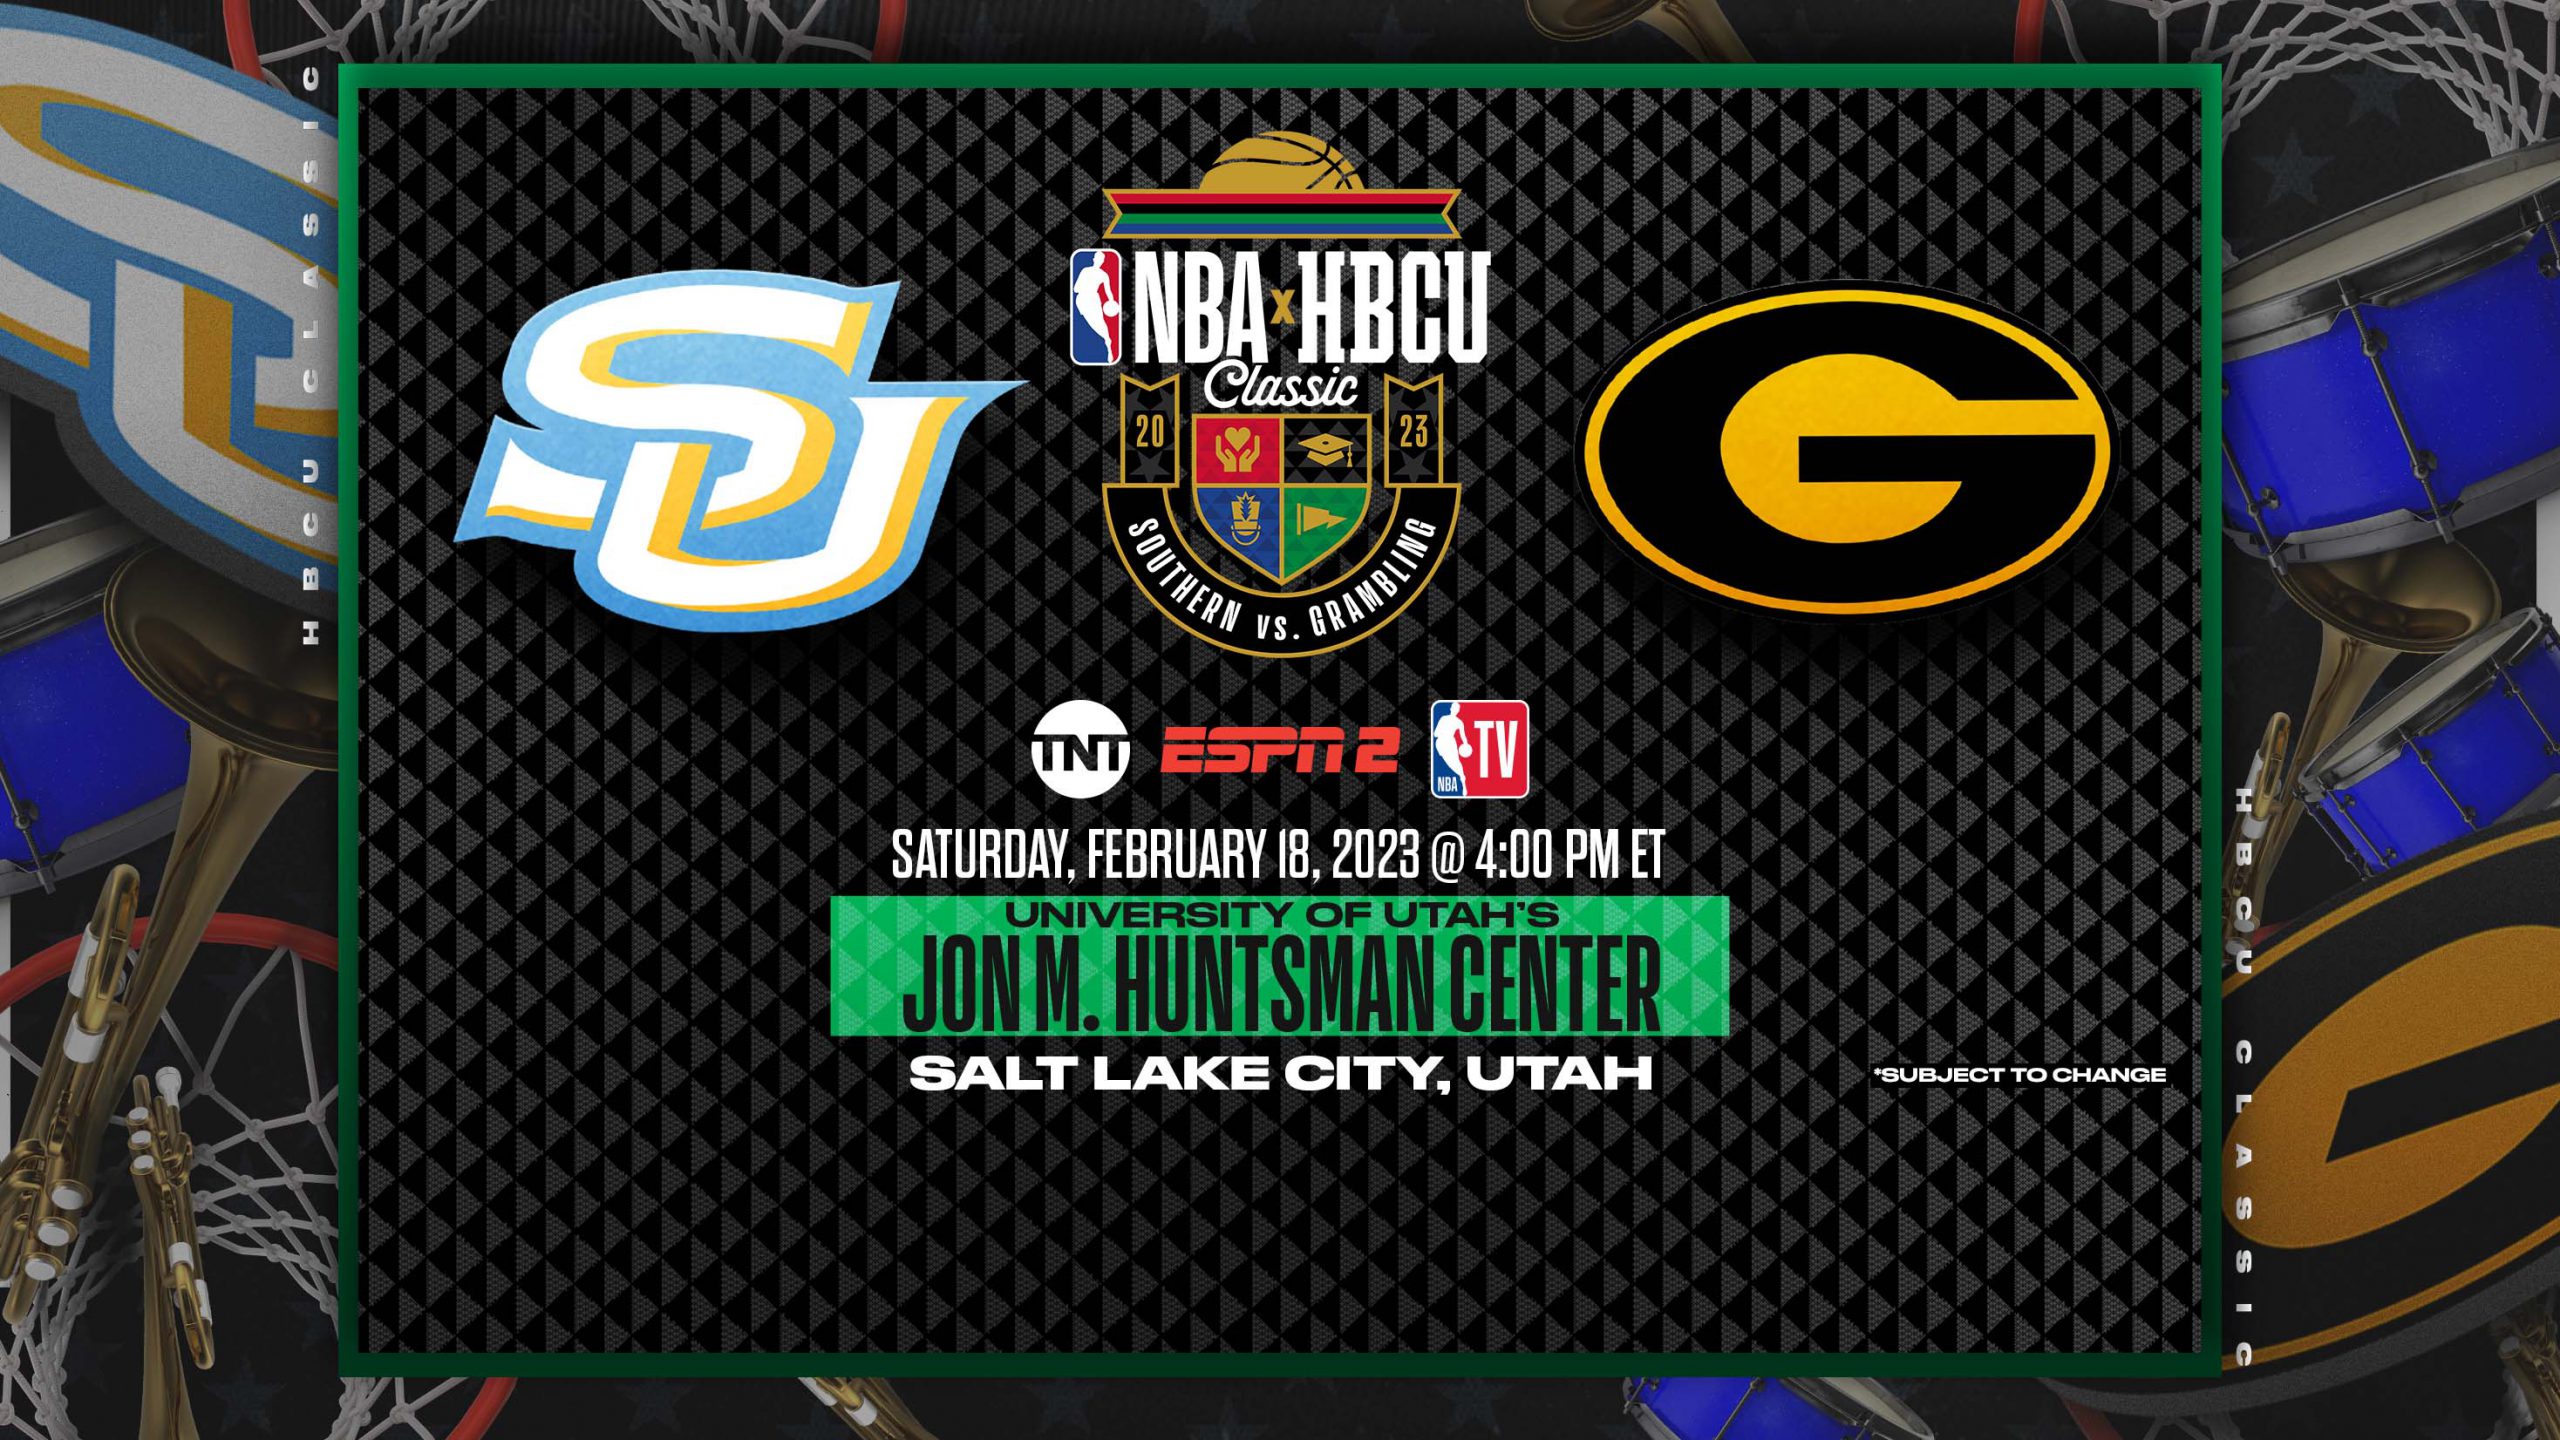 Grambling State University and Southern University to Play in NBA HBCU